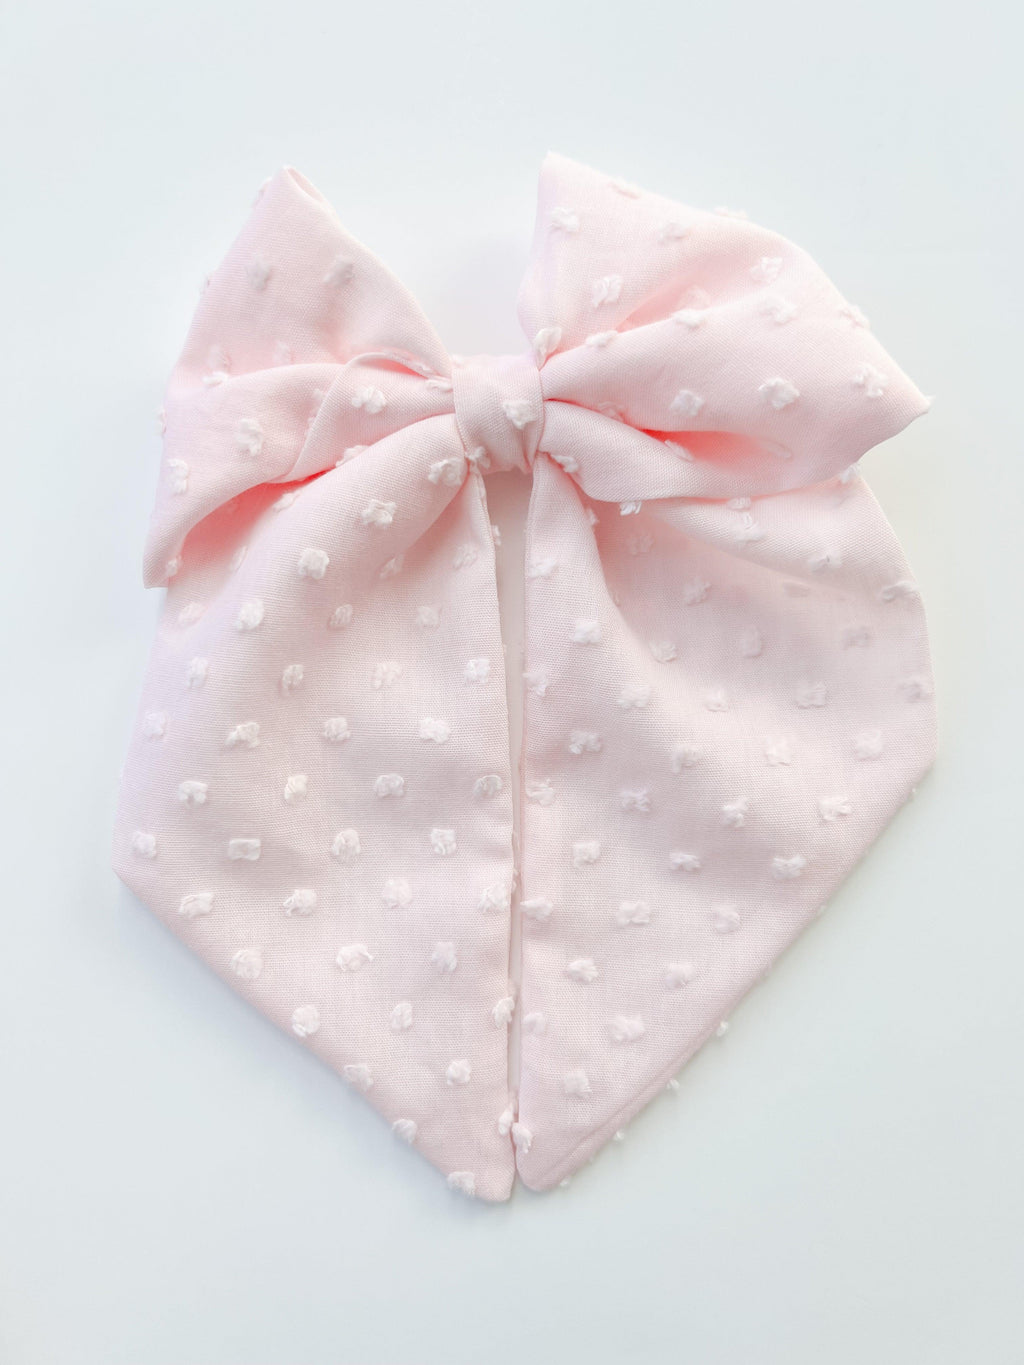 Vintage Sailor - Pink Swiss Dot | Nashville Bow Co. - Classic Hair Bows, Bow Ties, Basket Bows, Pacifier Clips, Wreath Sashes, Swaddle Bows. Classic Southern Charm.